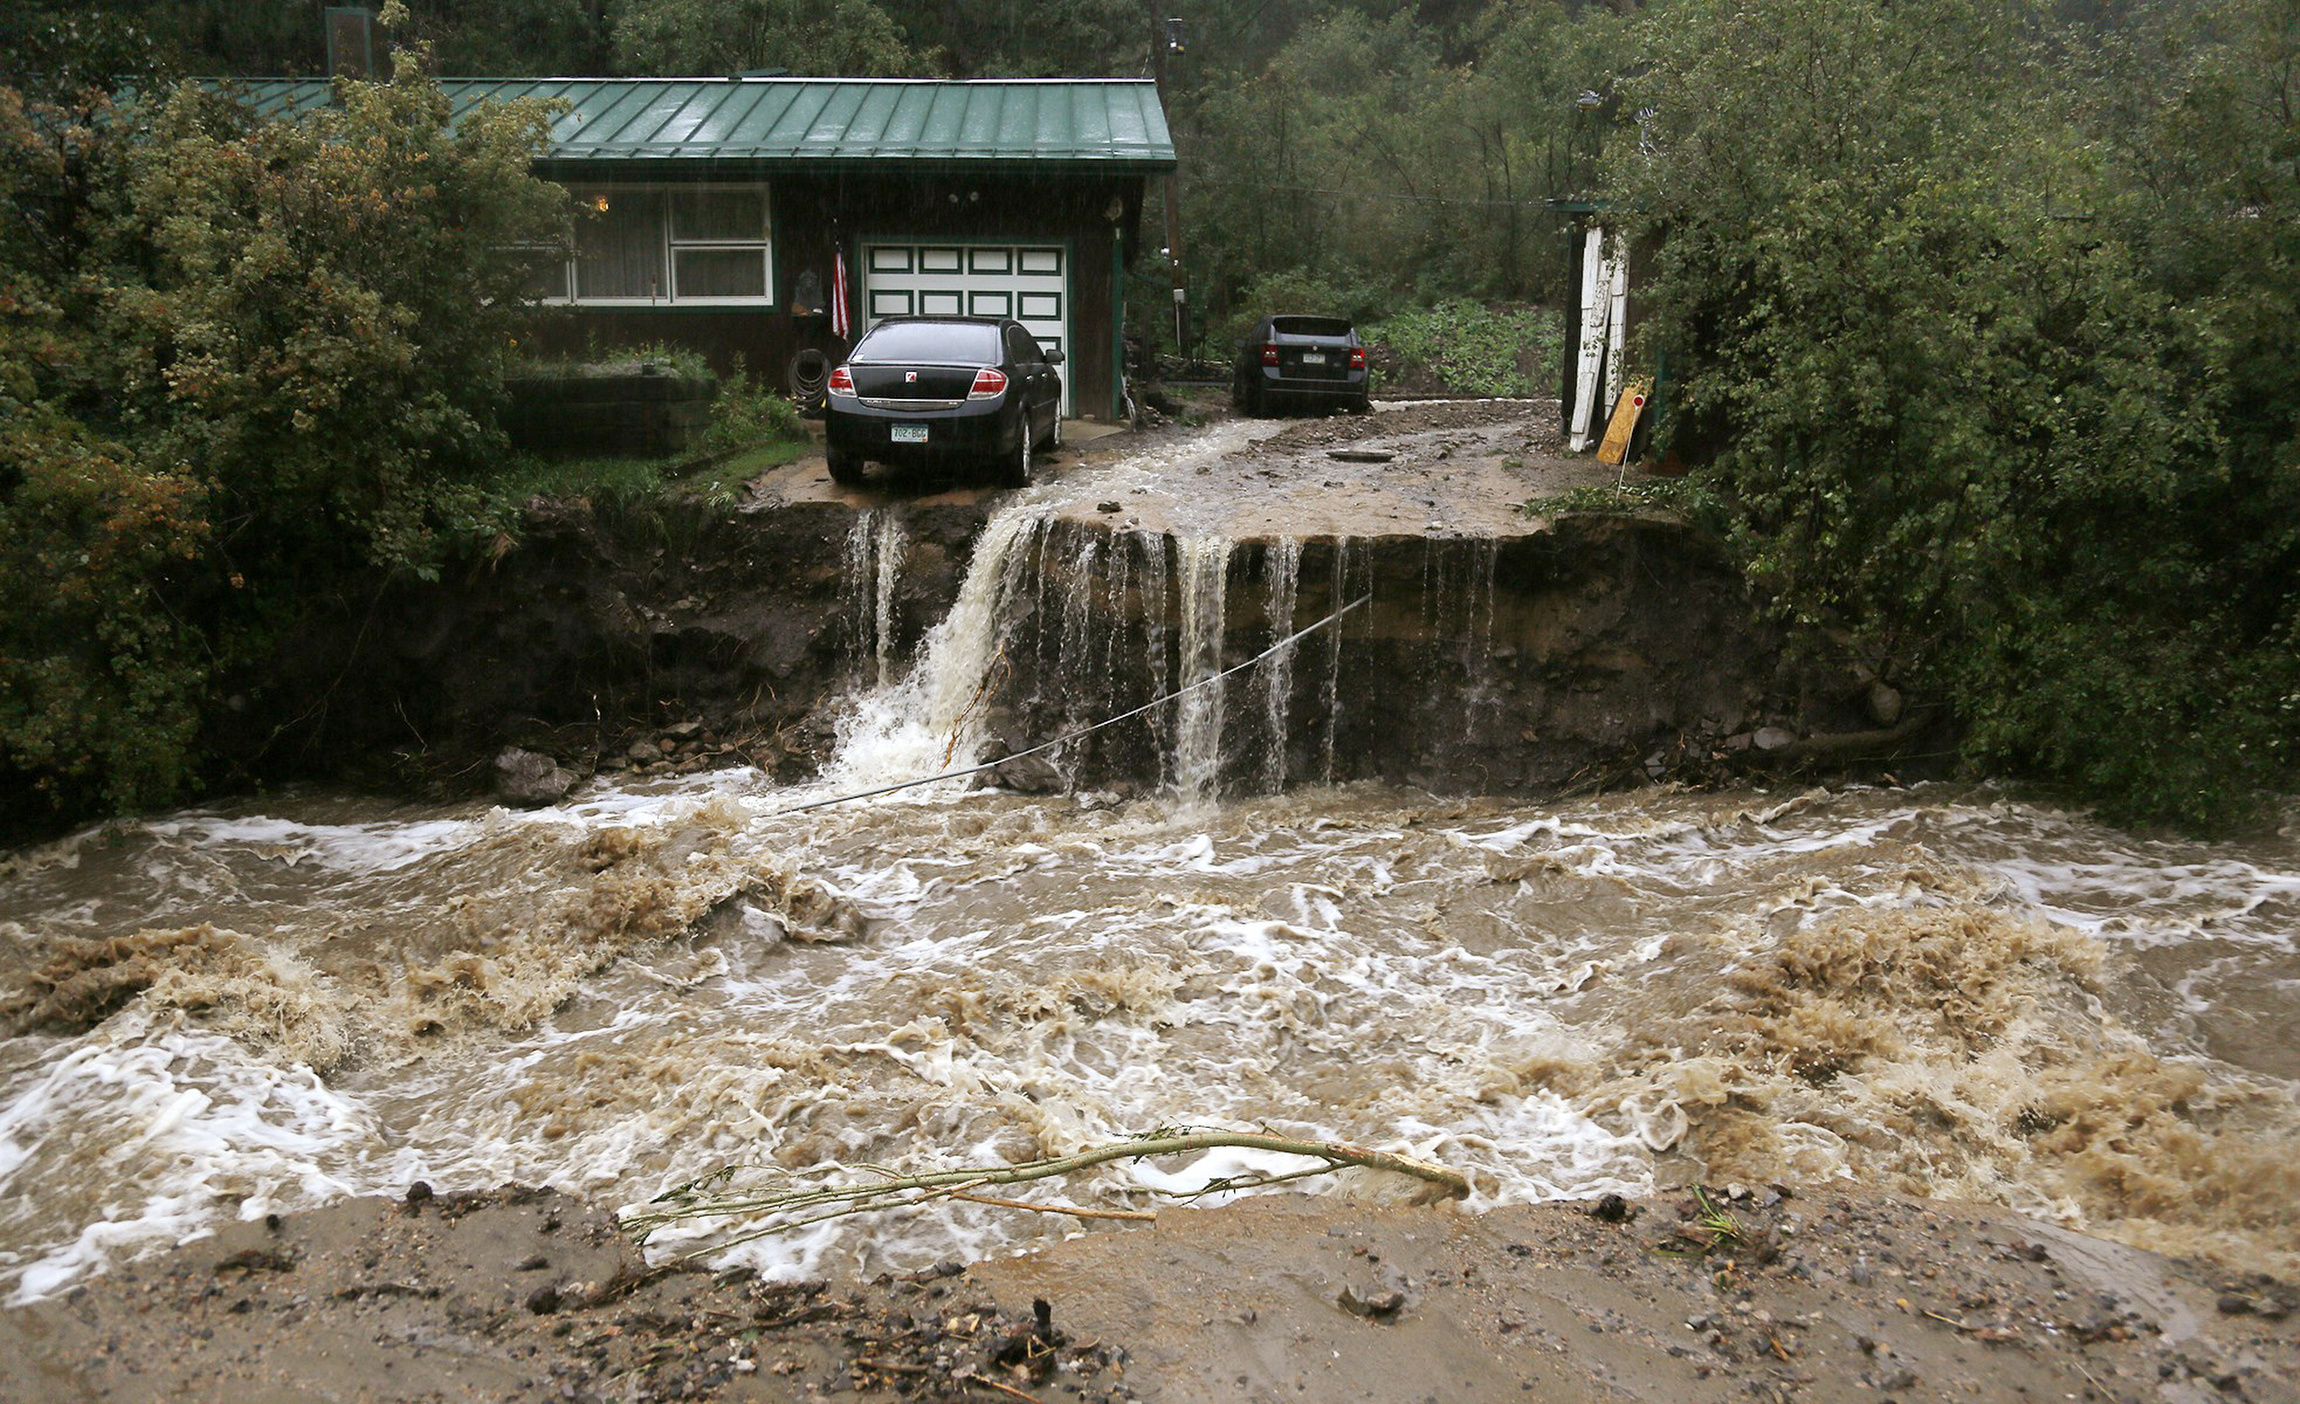 A home and car are seen Thursday after a flash flood in Coal Creek destroyed a bridge near Golden, Colo. (CNS/Reuters/Rick Wilking)